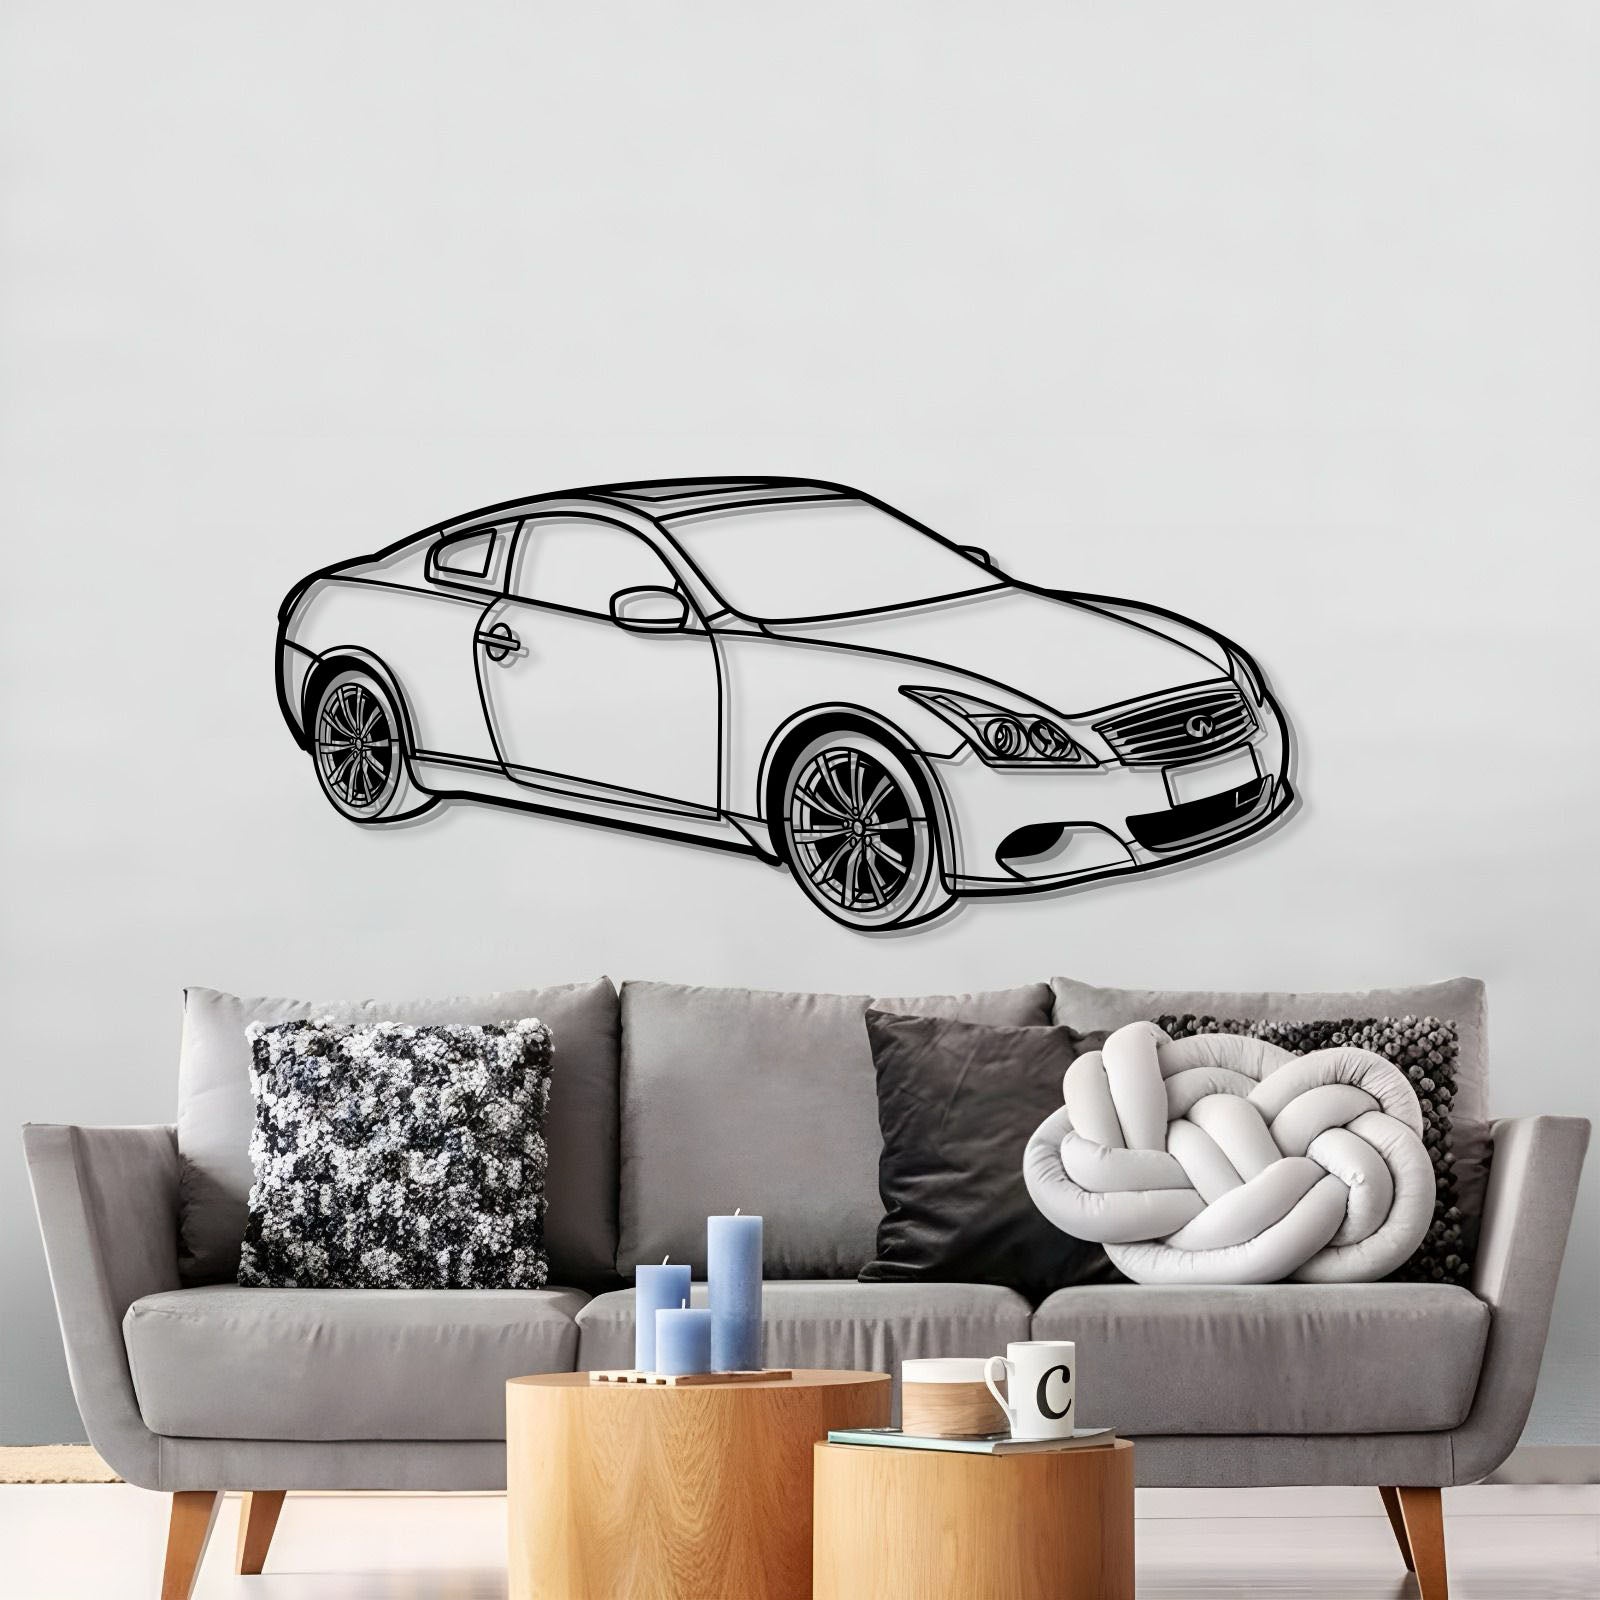 2009 G37 Coupe Perspective Metal Car Wall Art - MT1275